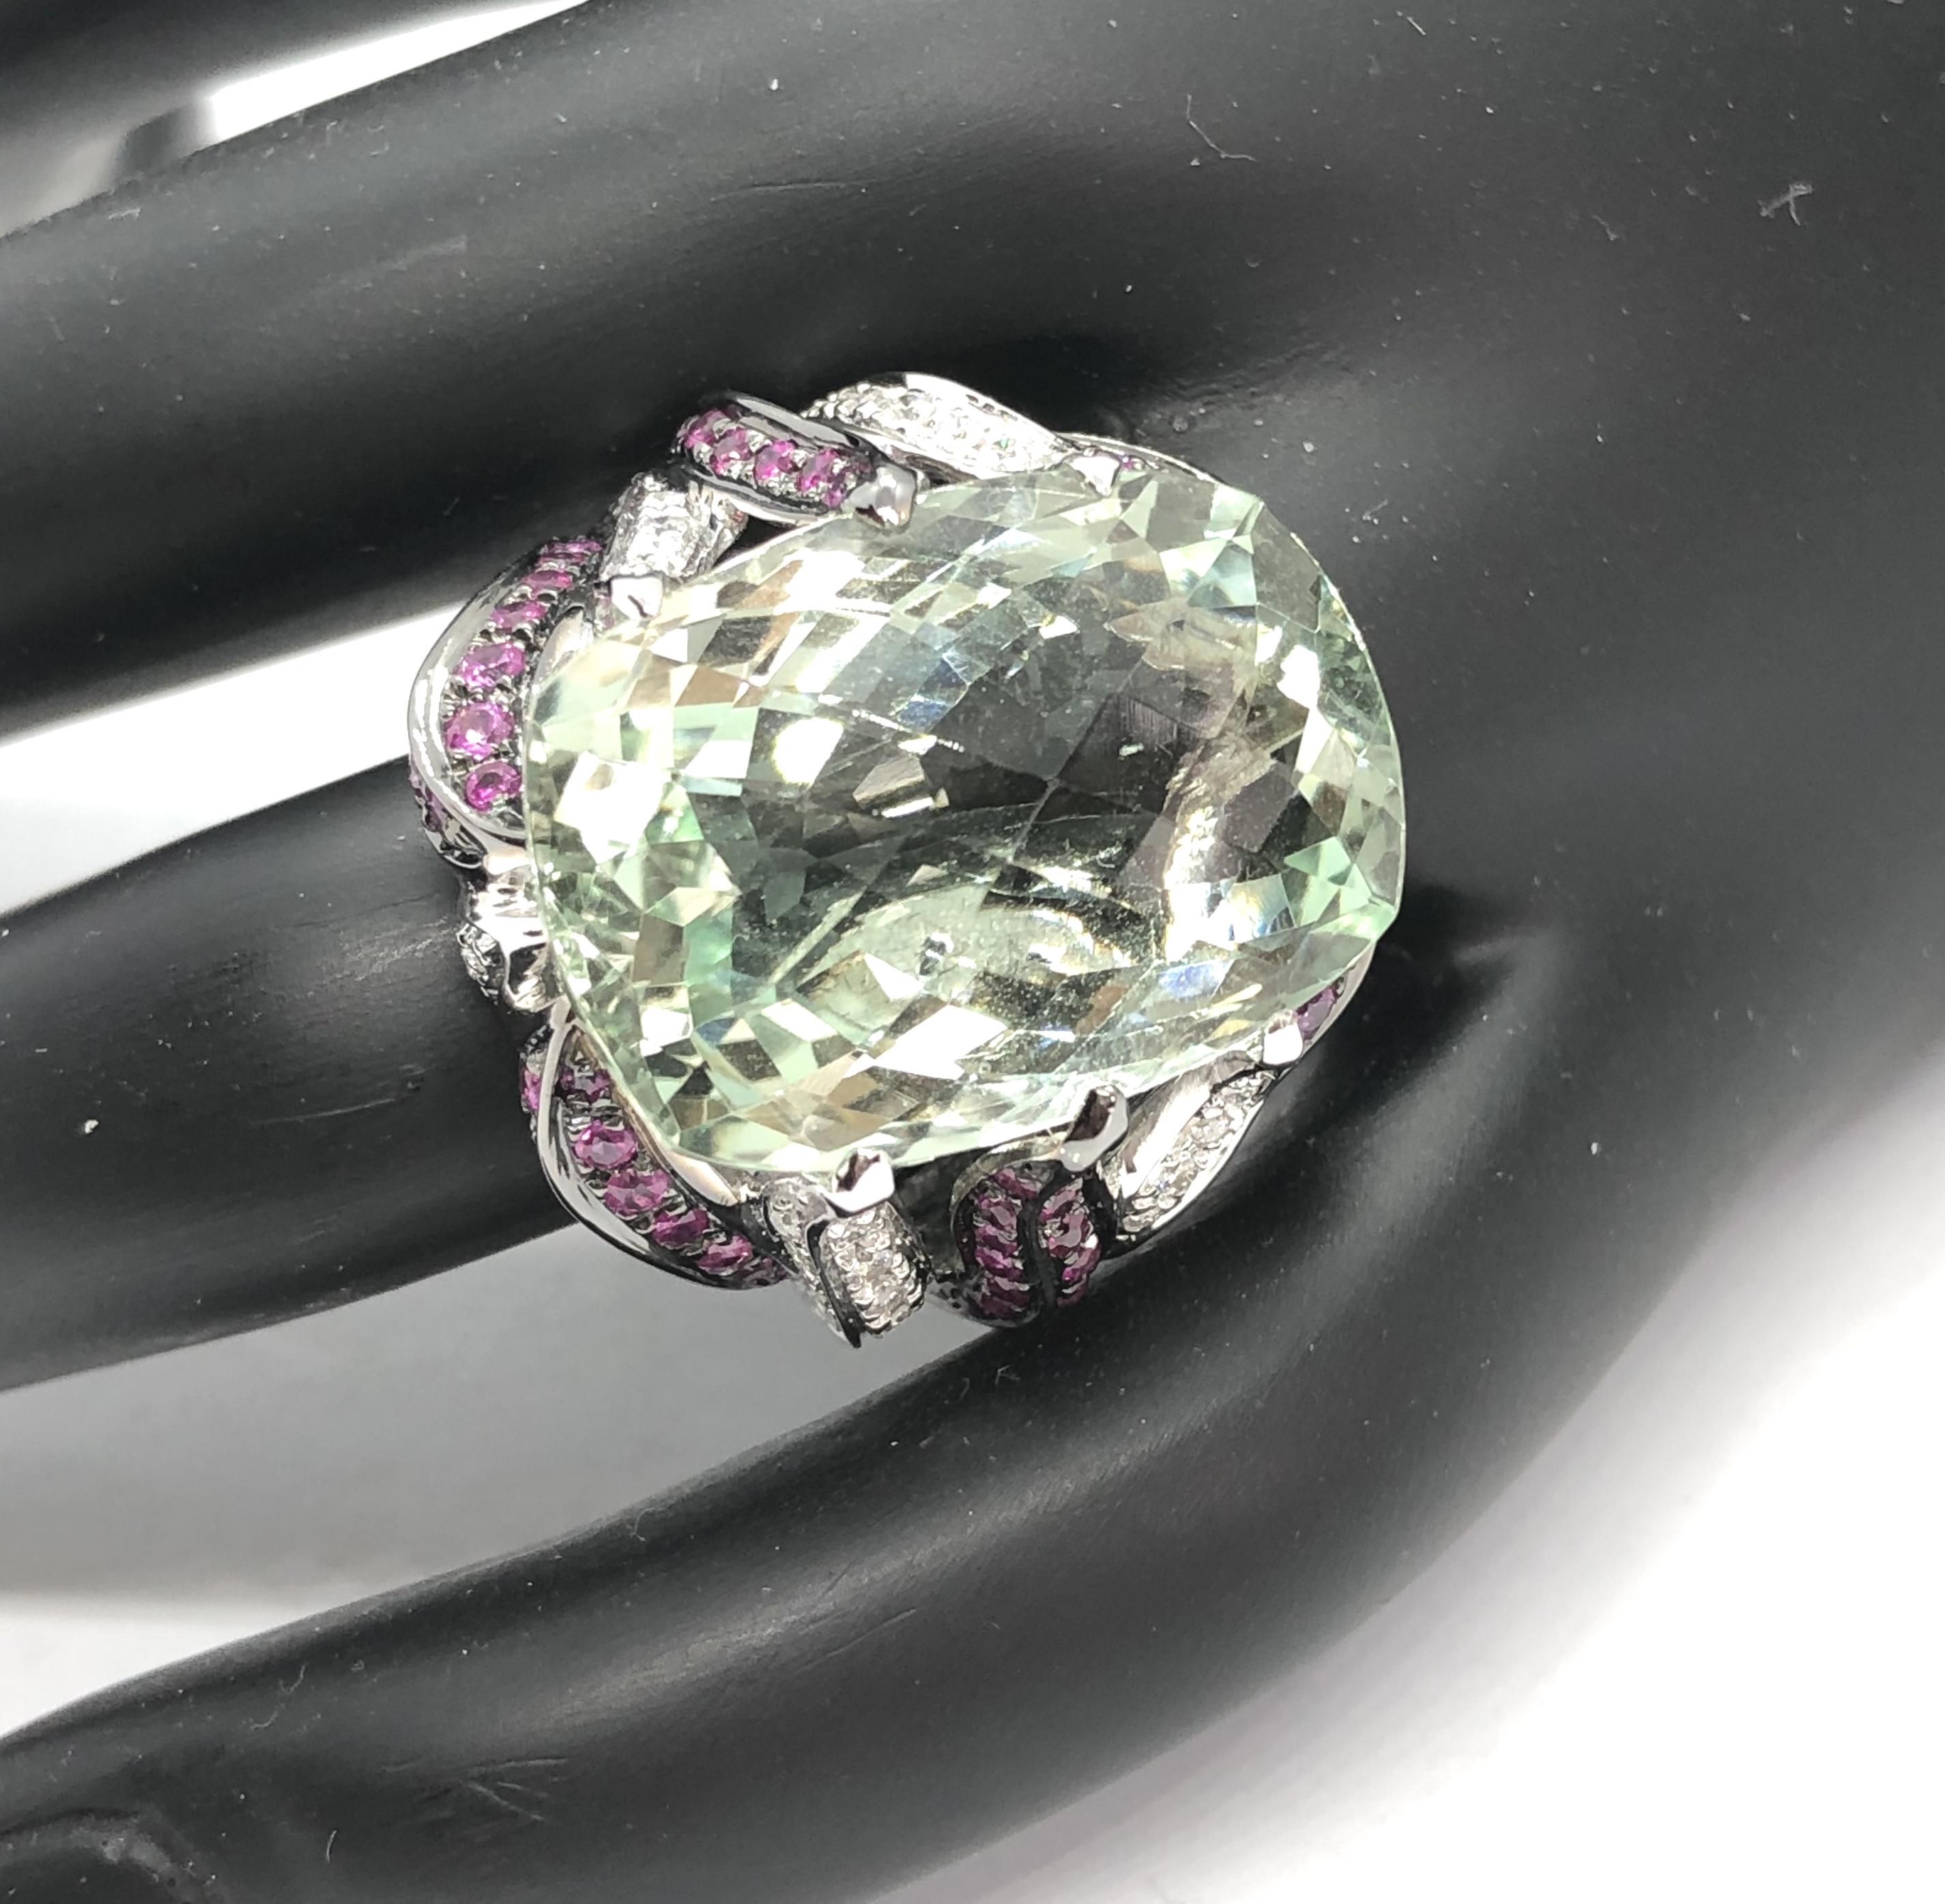 23 Ct Green Prasiolite White Gold Cocktail Ring Diamond and Pink Sapphires Flame For Sale 4